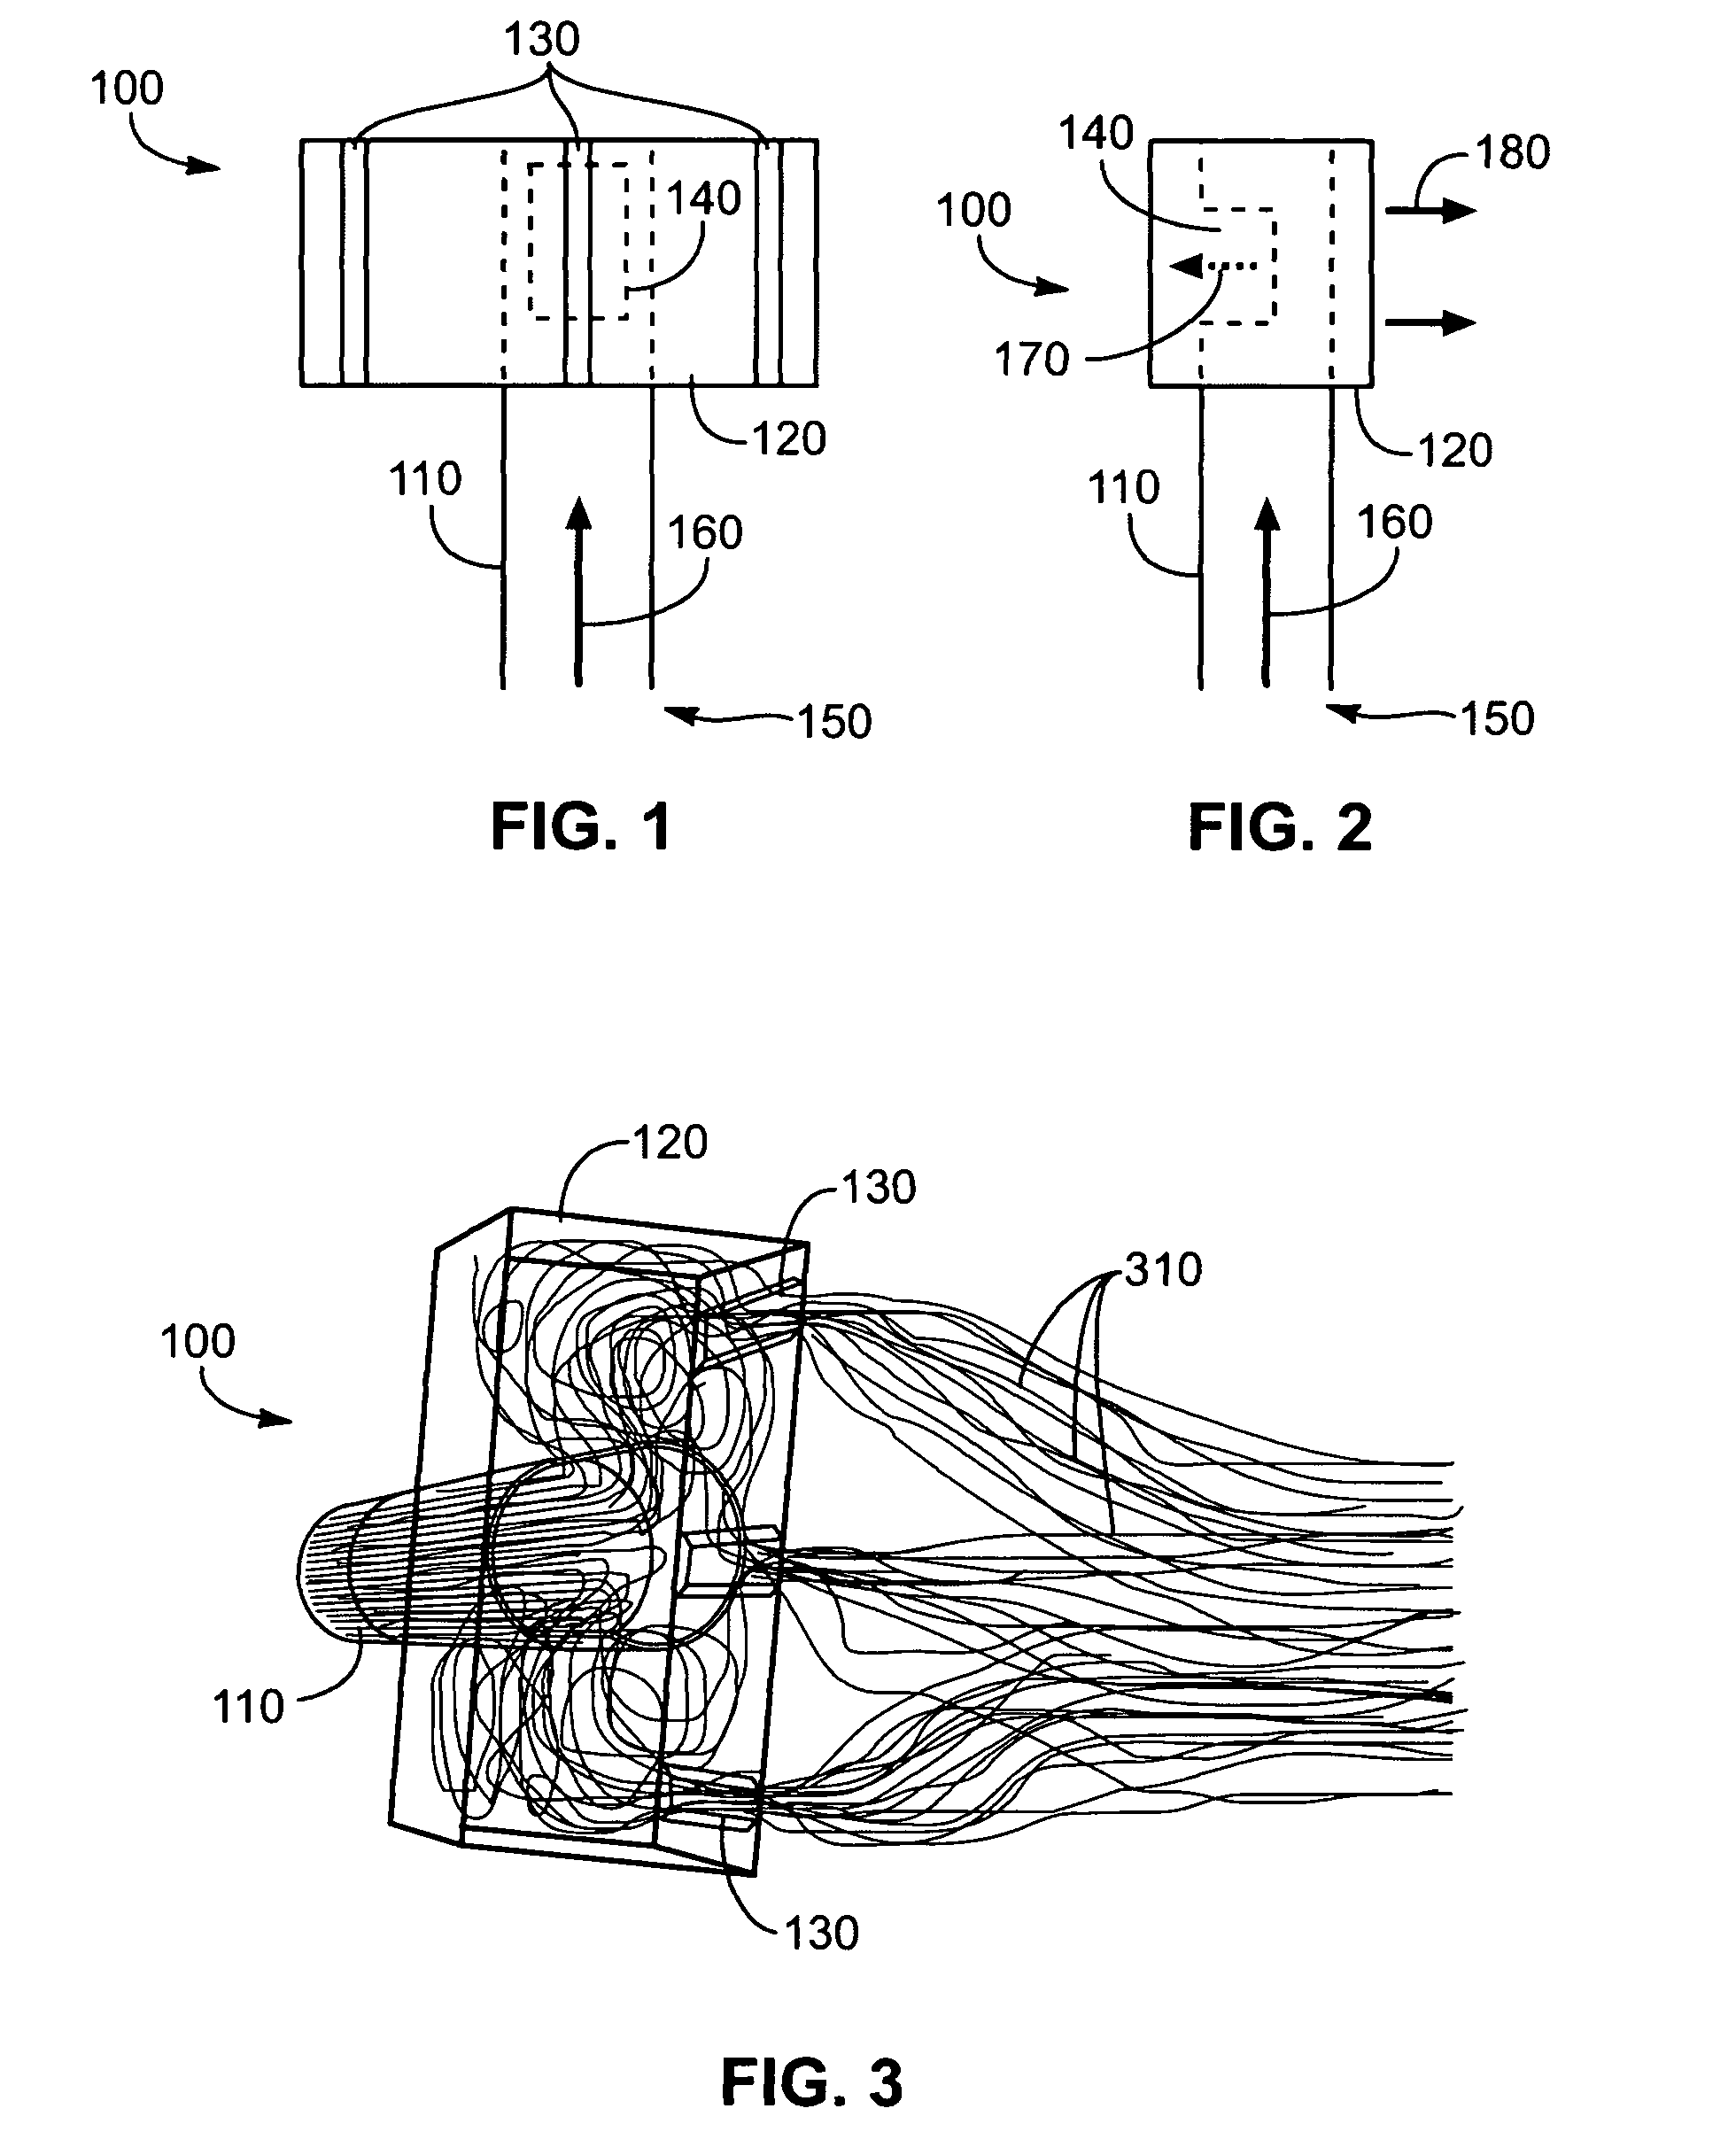 Enclosed volume exhaust diffuser apparatus, system, and method